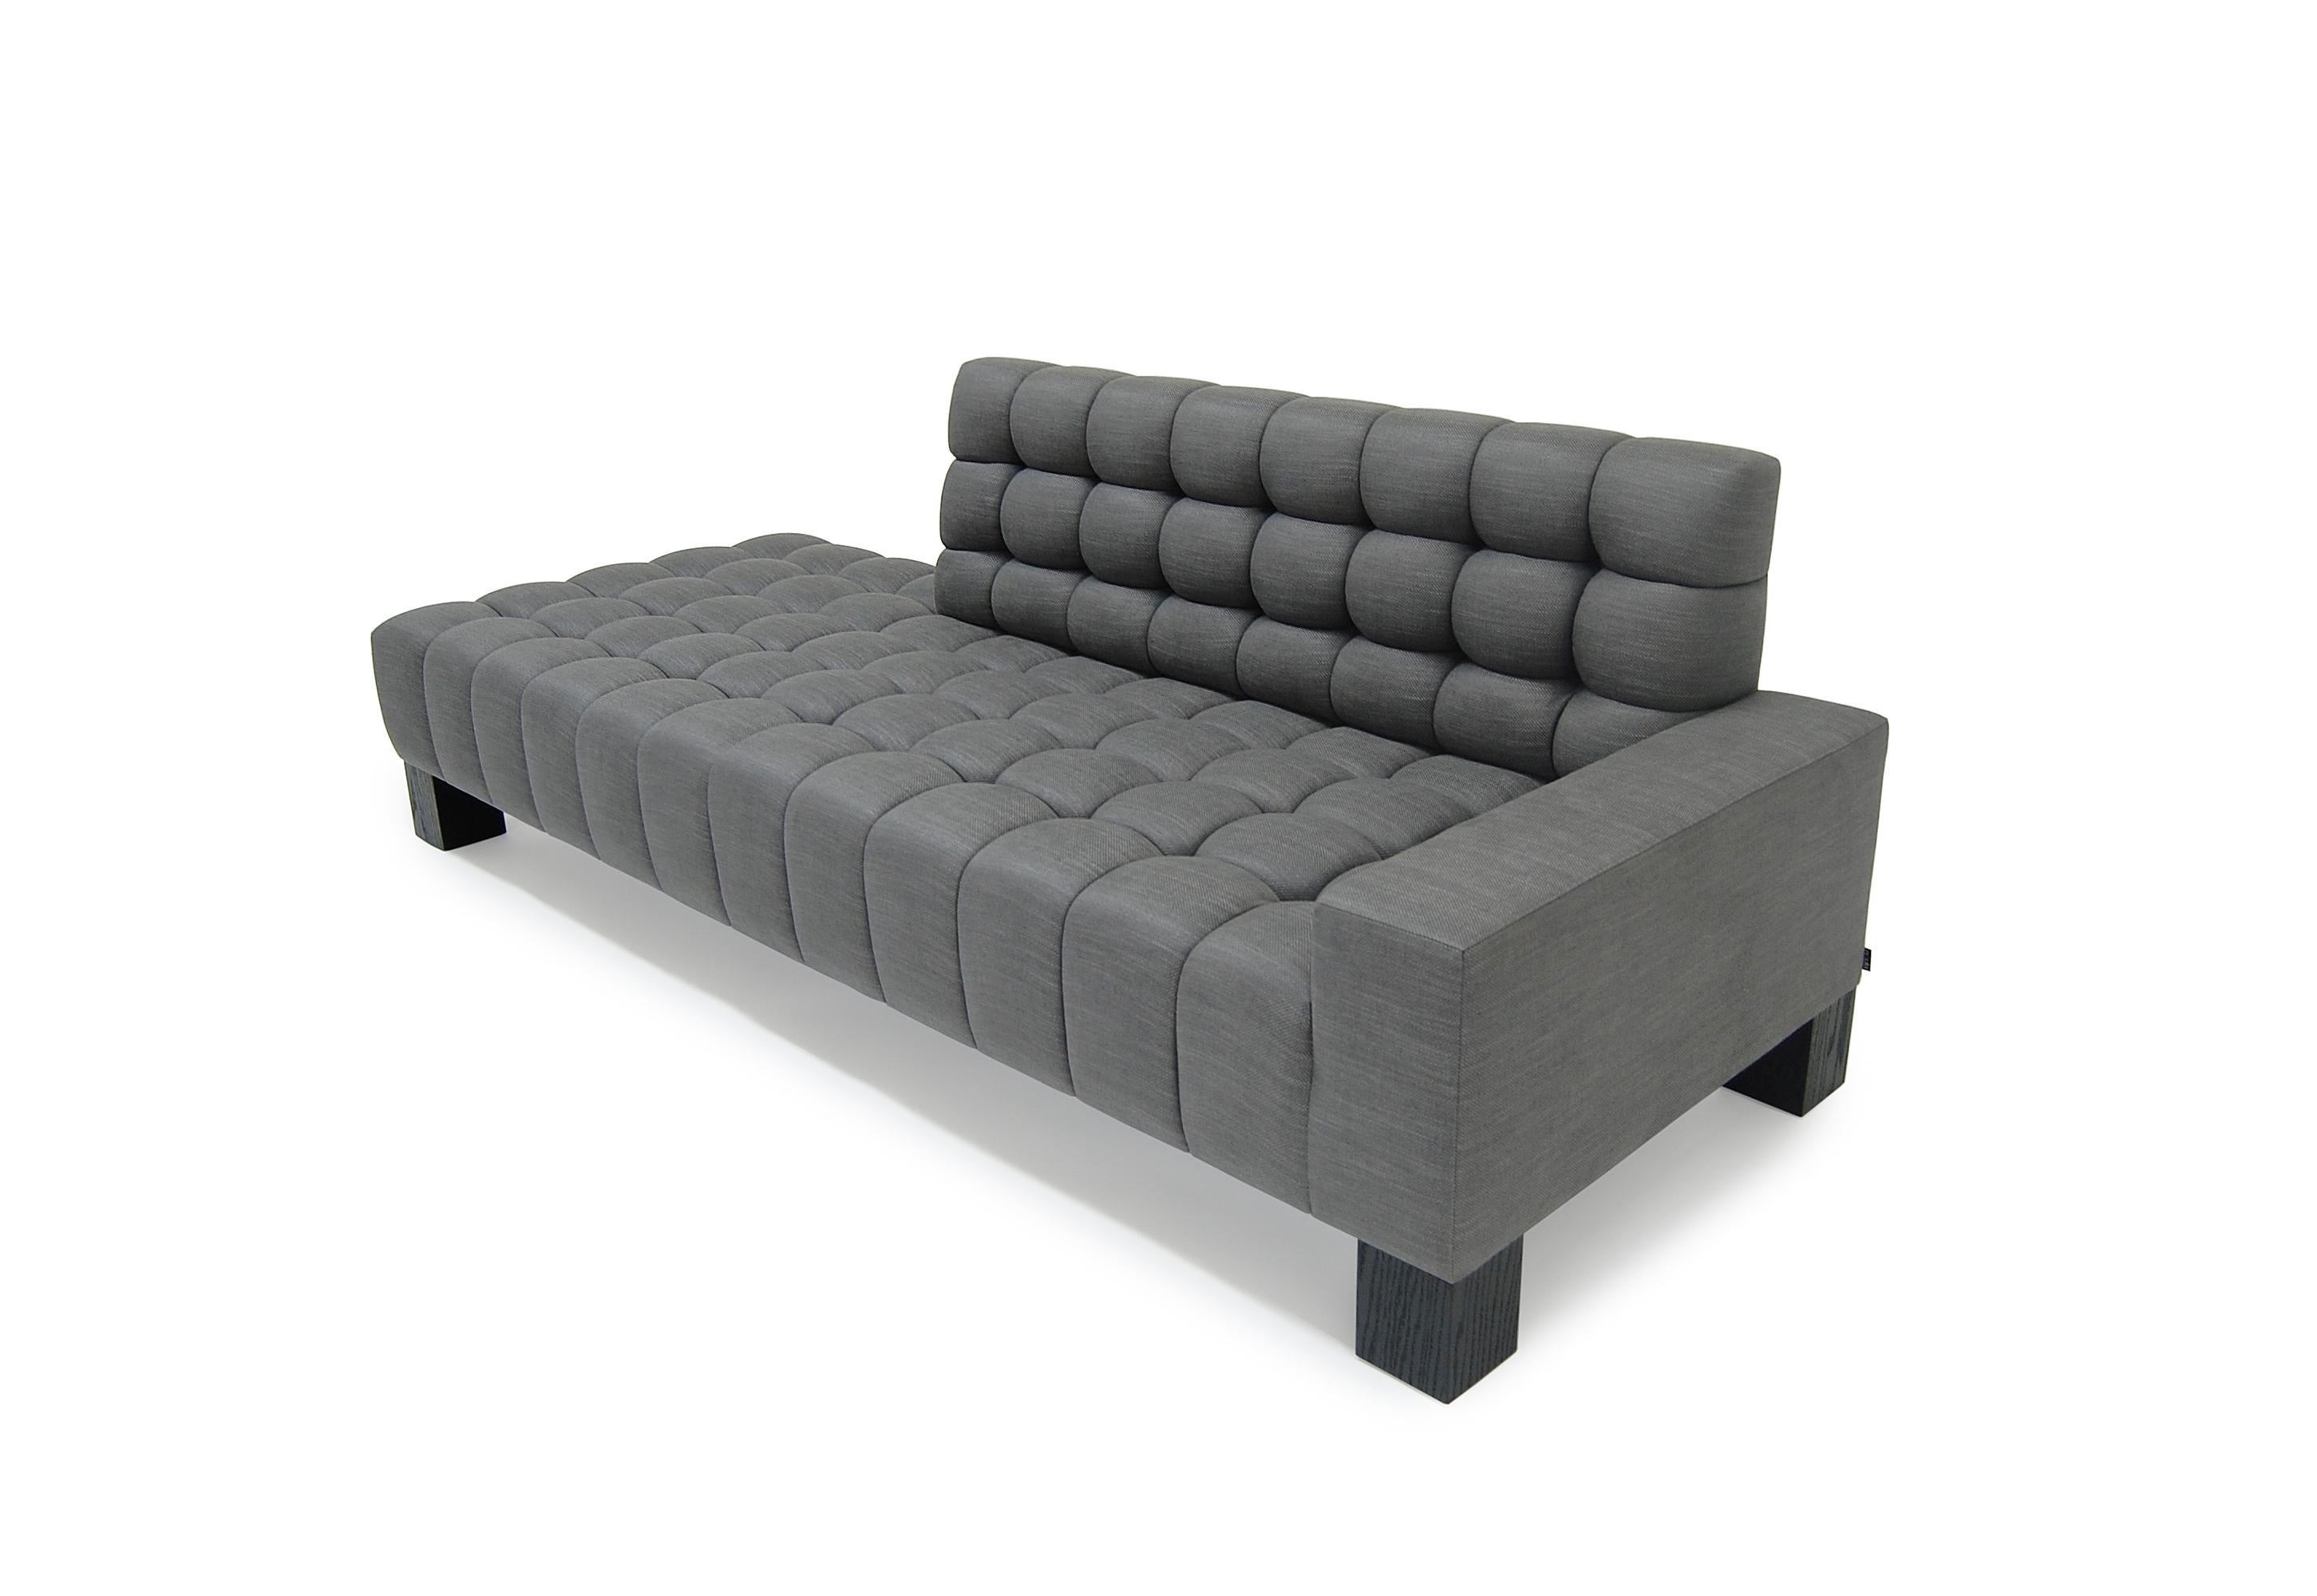 Asymmetrical contours of the Mini Abyss Sofa allow your eyes to roam to and from each of its unique ends. The horizon of the sofa is reminiscent of a casual lounge which melds into a cavernous nook where you can sit back and relax. The upholstered